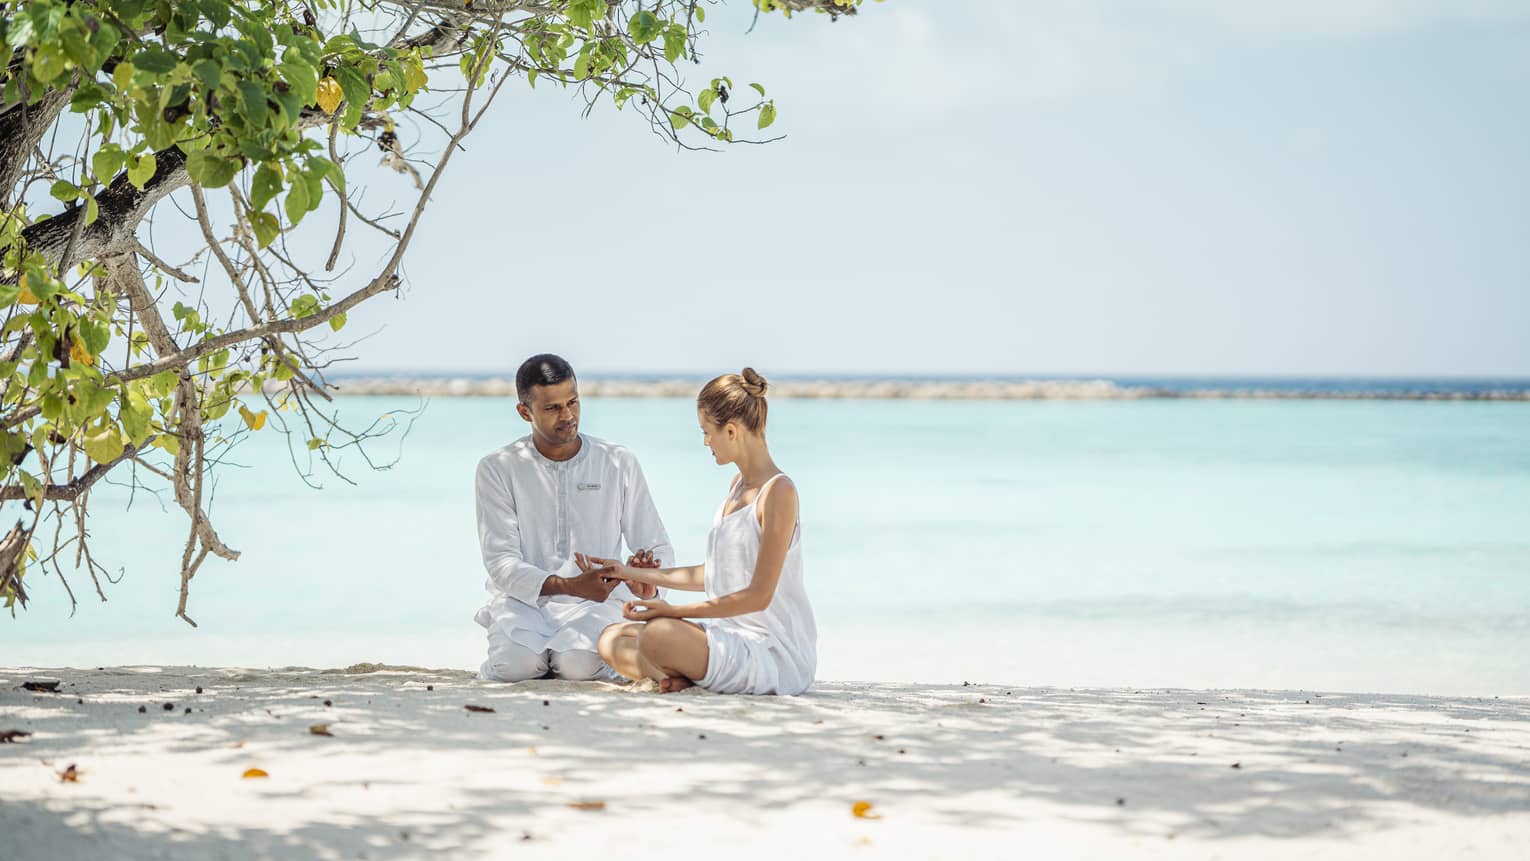 Dr. Arun Tomson teaches holistic practices to female guest on the shore, crystal-clear blue water in the background